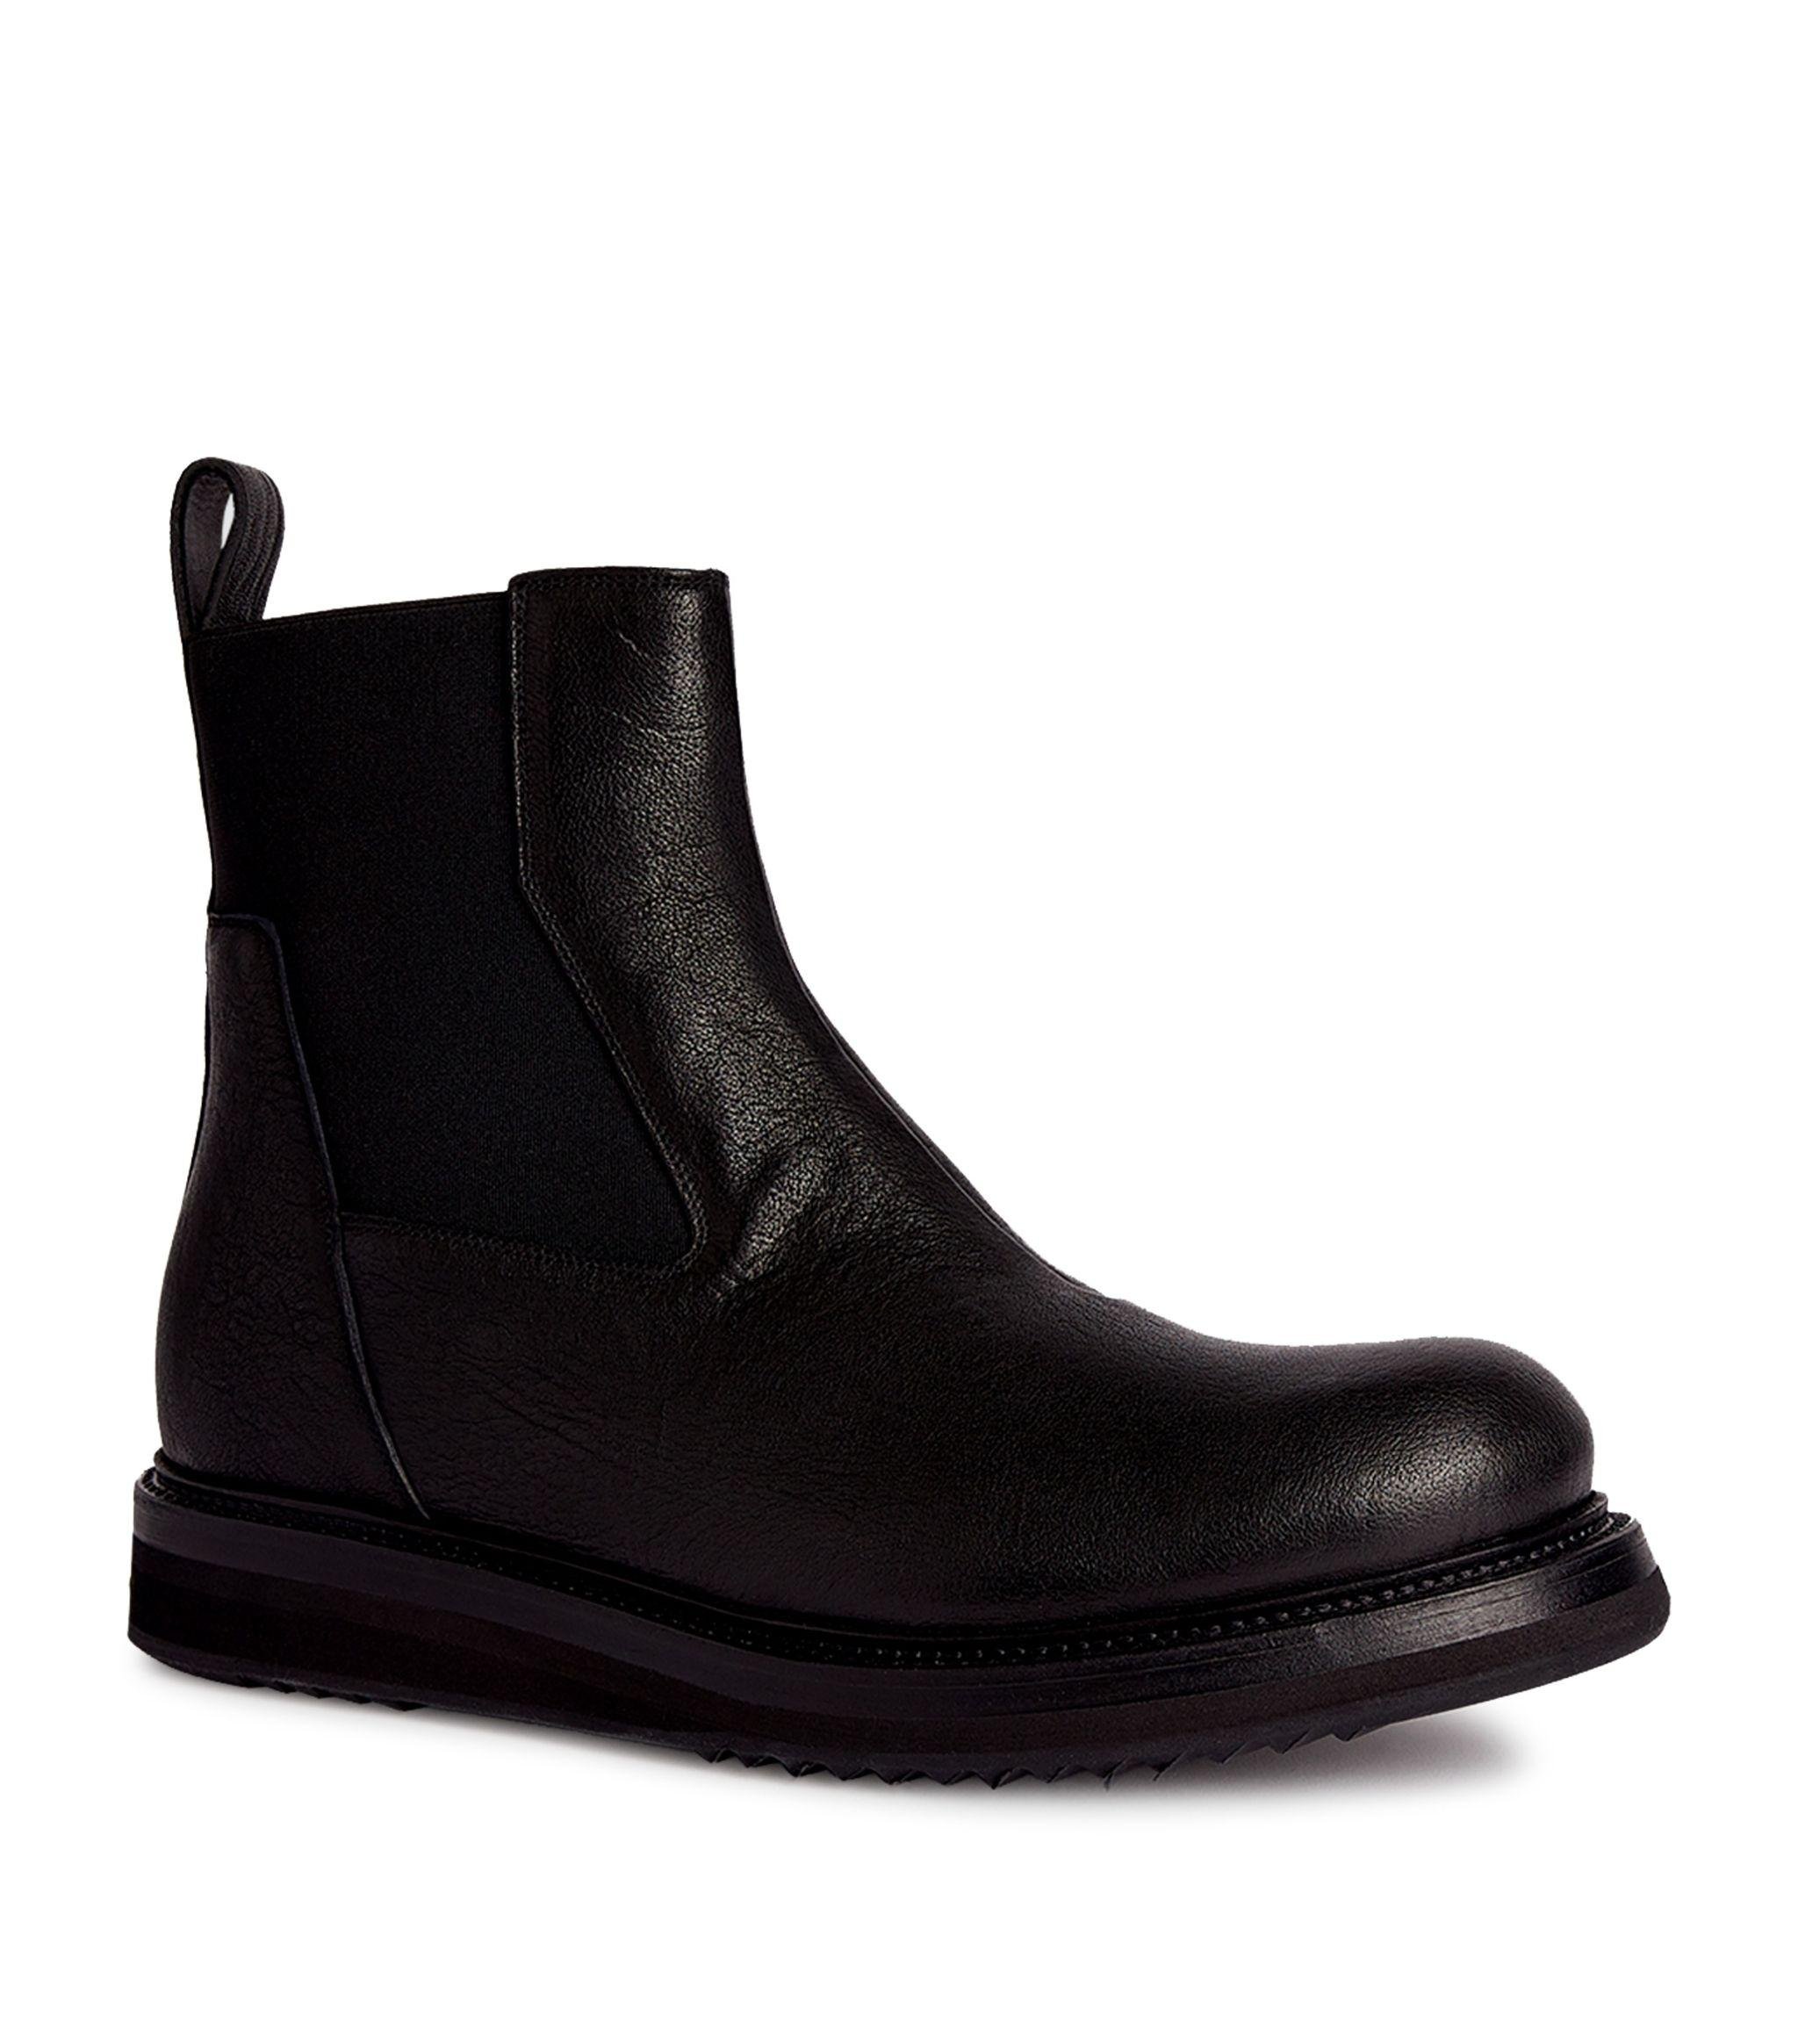 Rick Owens Leather Chelsea Boots in Black for Men - Lyst